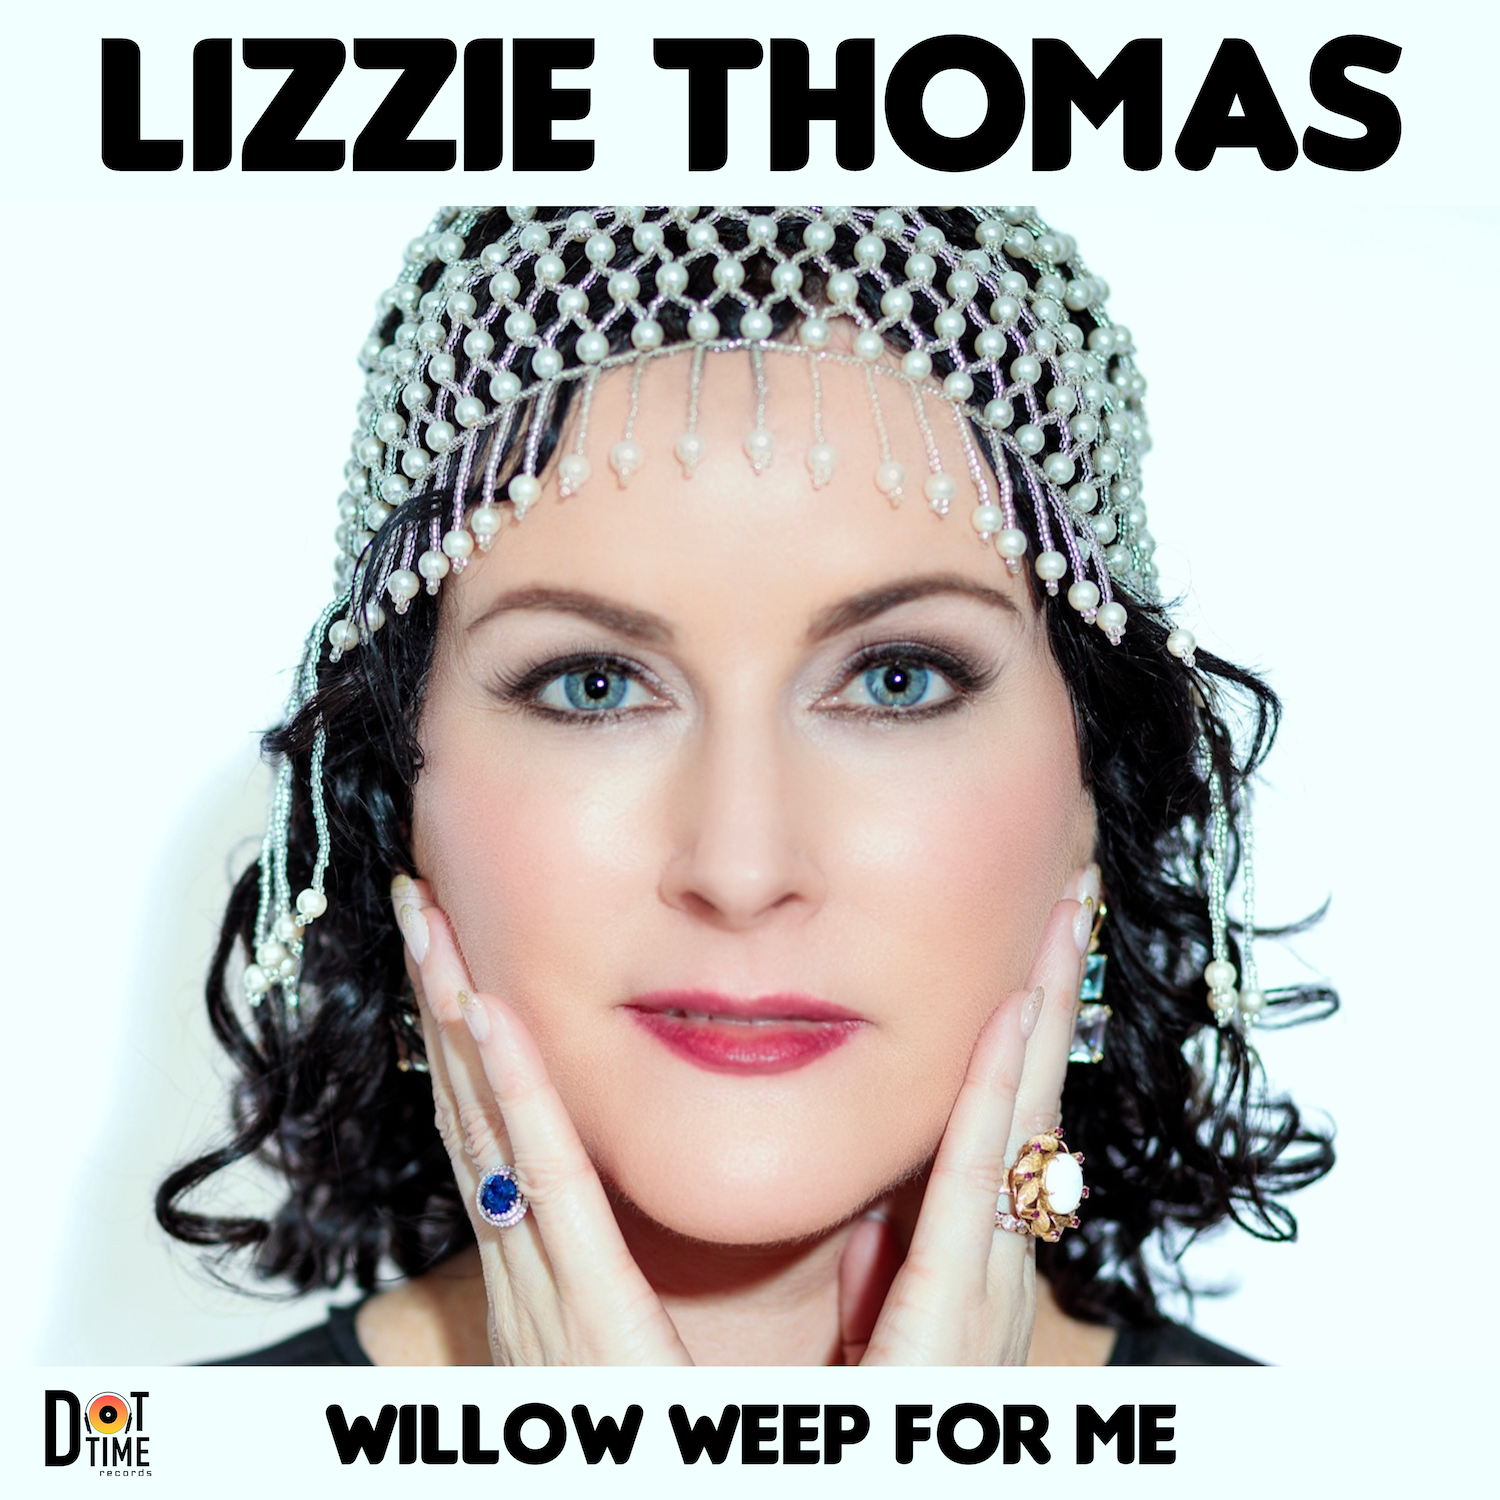 Lizzie Thomas - Willow Weep For Me 1500x1500